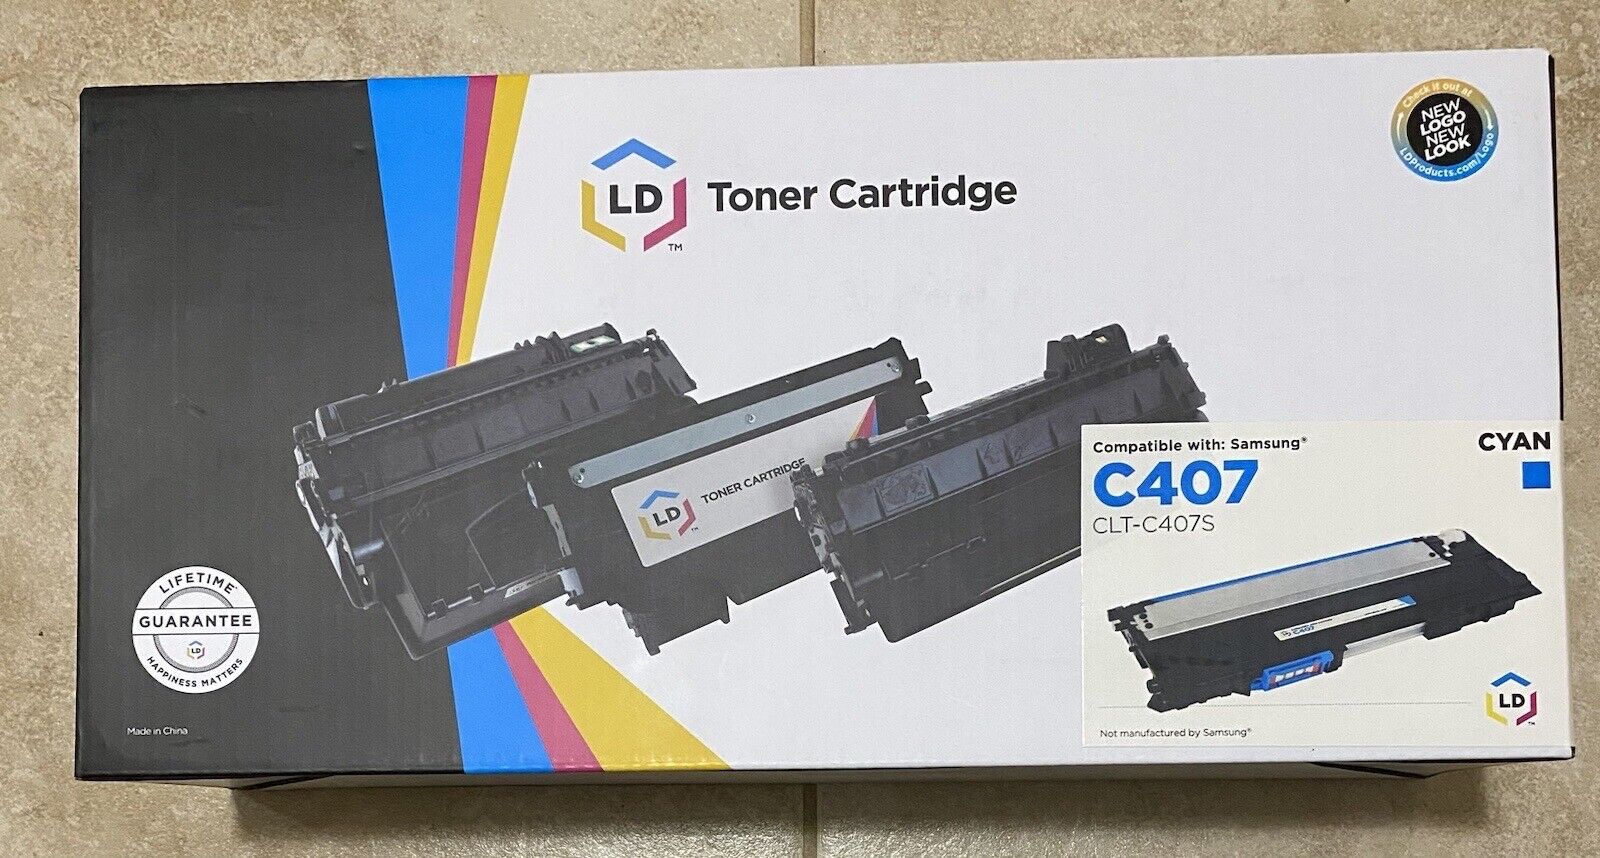 LD Toner Cartridge Compatible with Samsung C407 CLT-C407S Cyan; New/Sealed